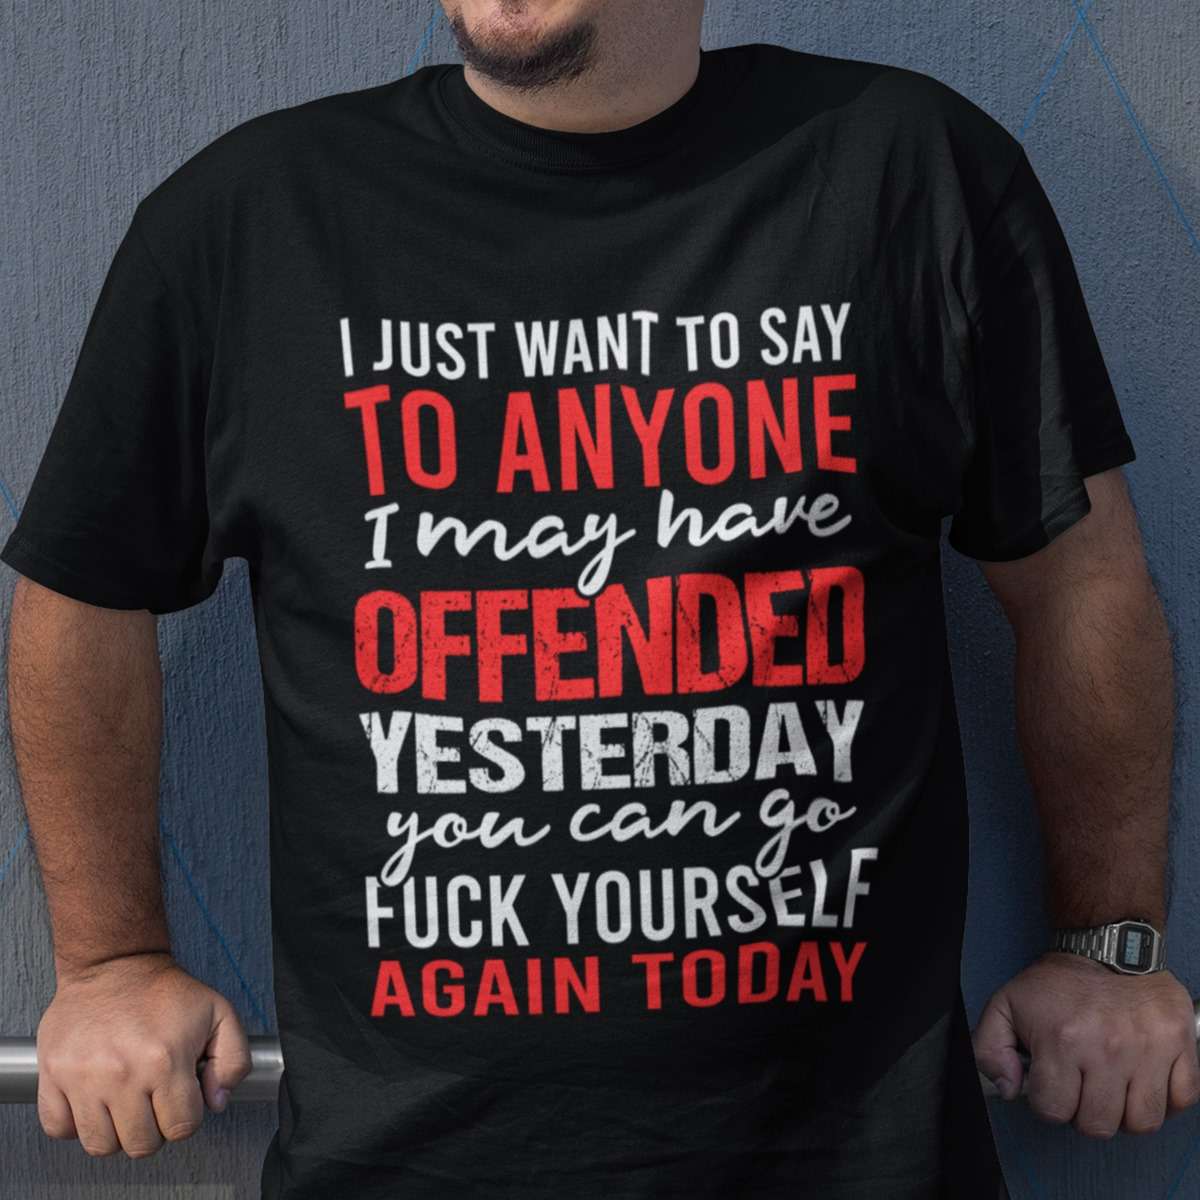 I just want to say to anyone I may have offended yesterday you can go fuck yourself again today